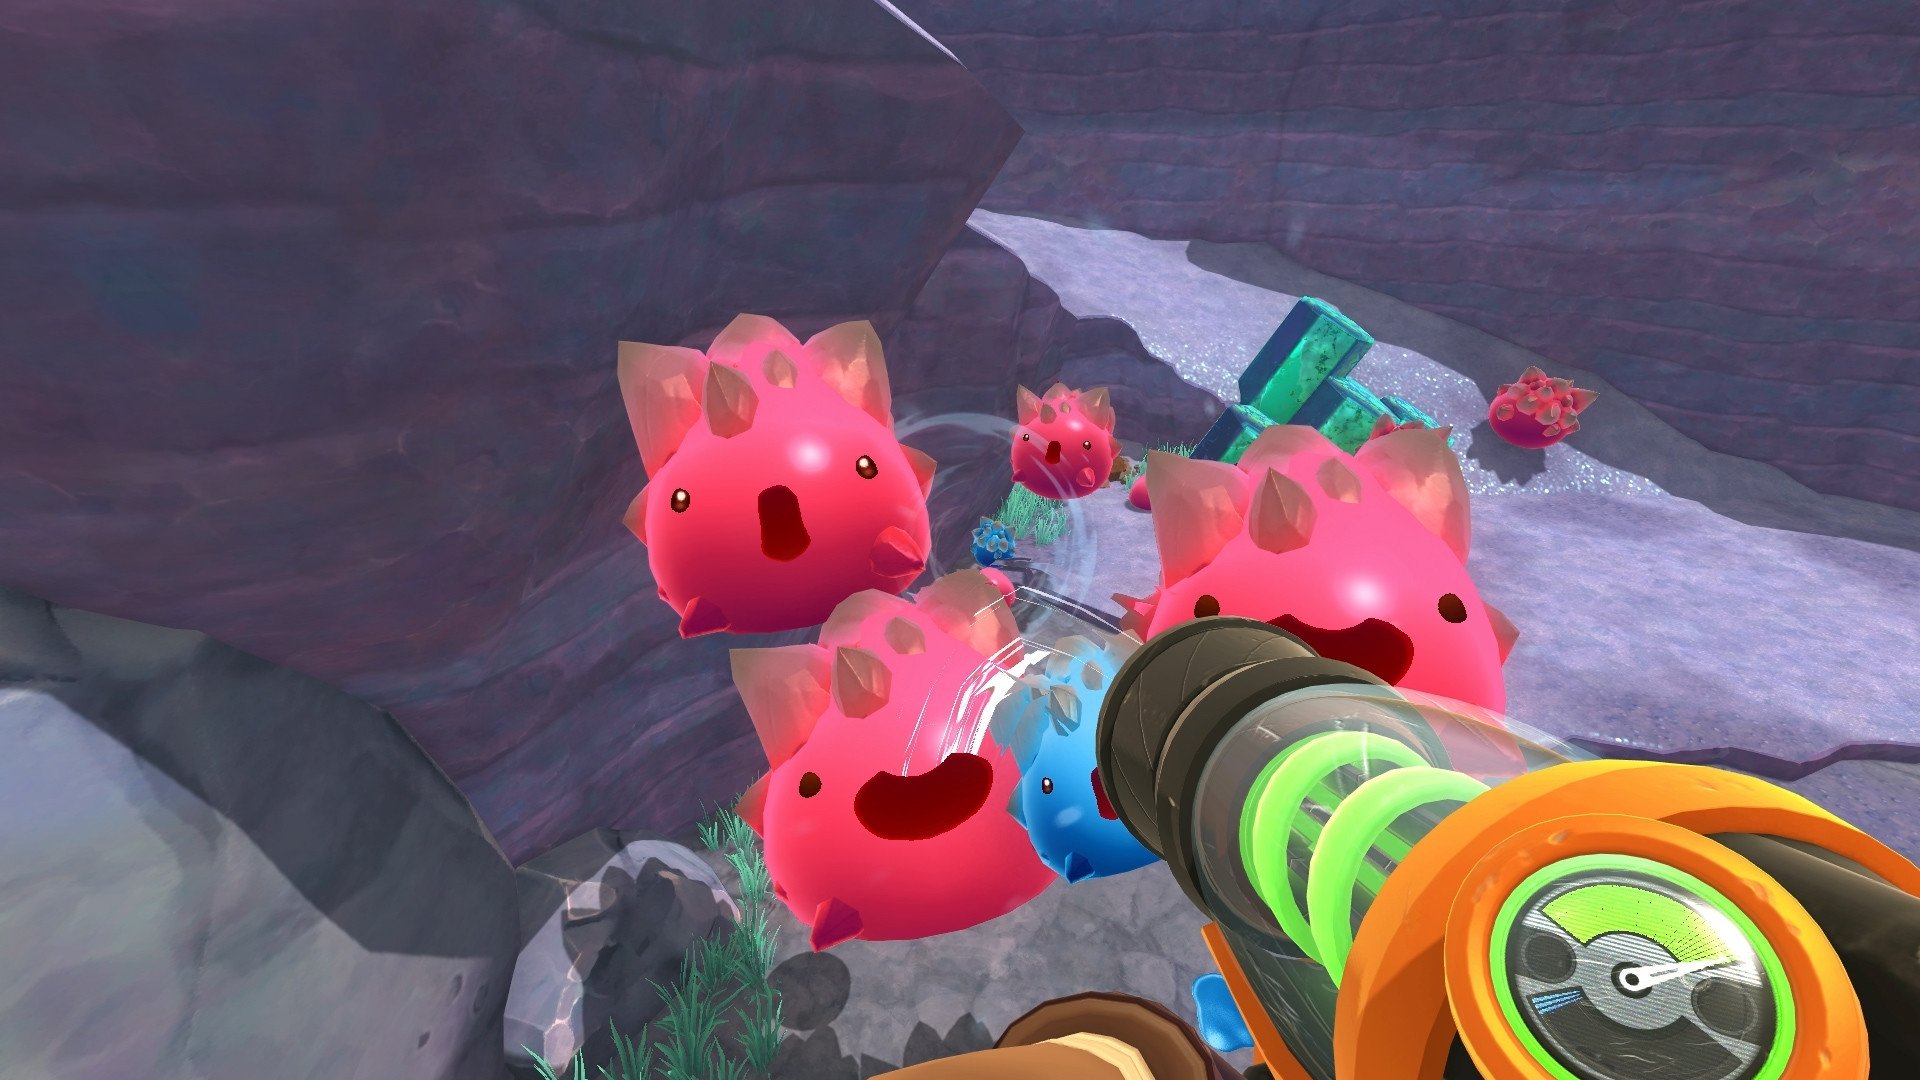 slime rancher two download